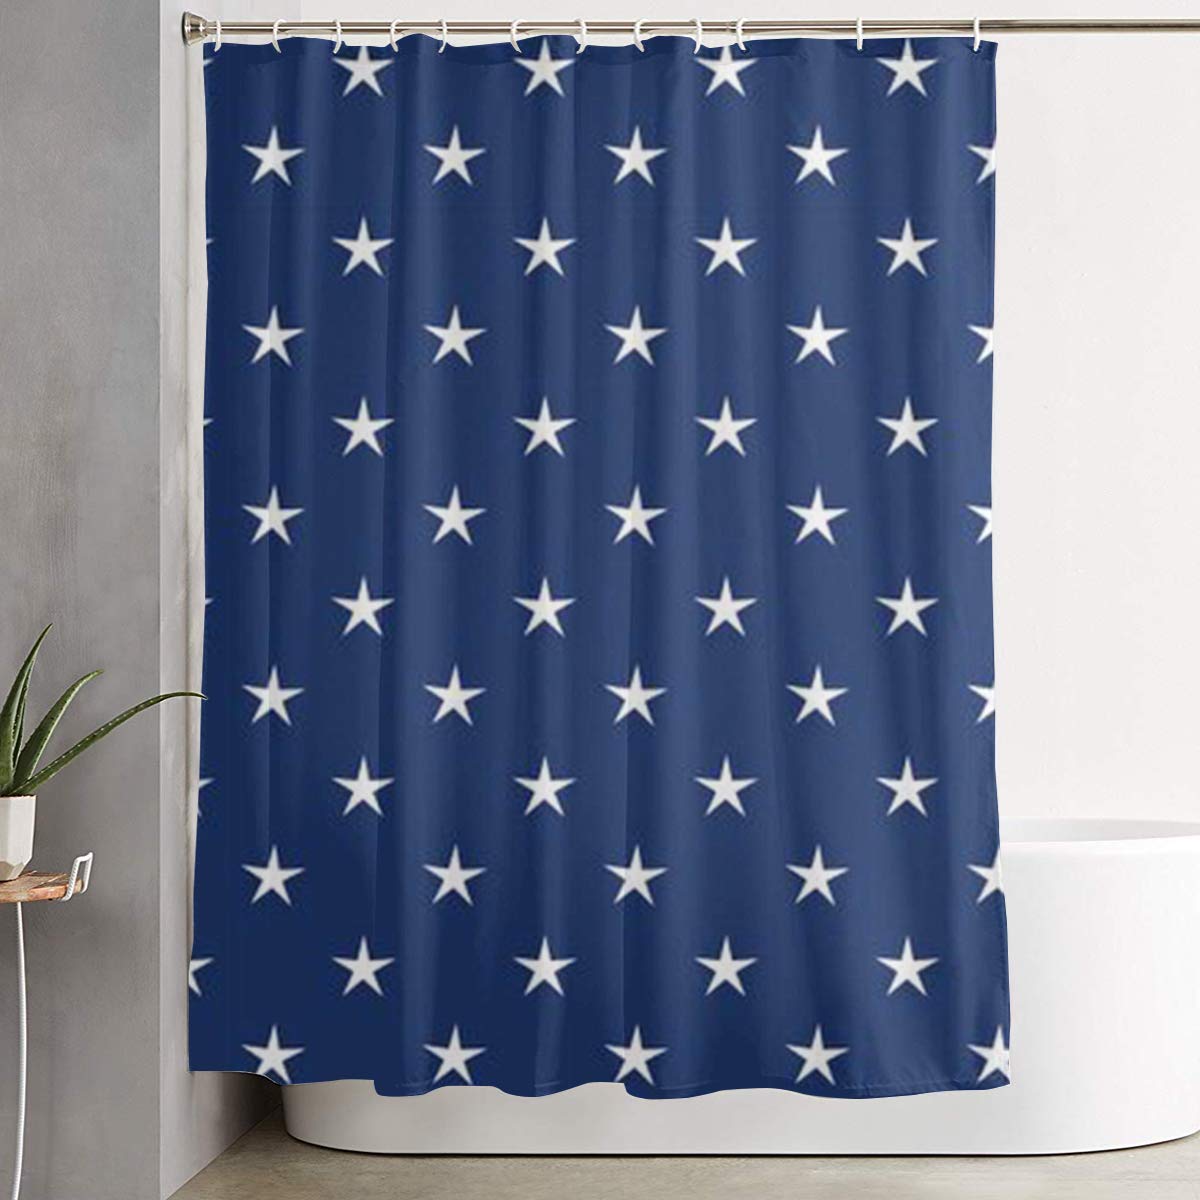 Black Family Shower Curtains - HD Wallpaper 